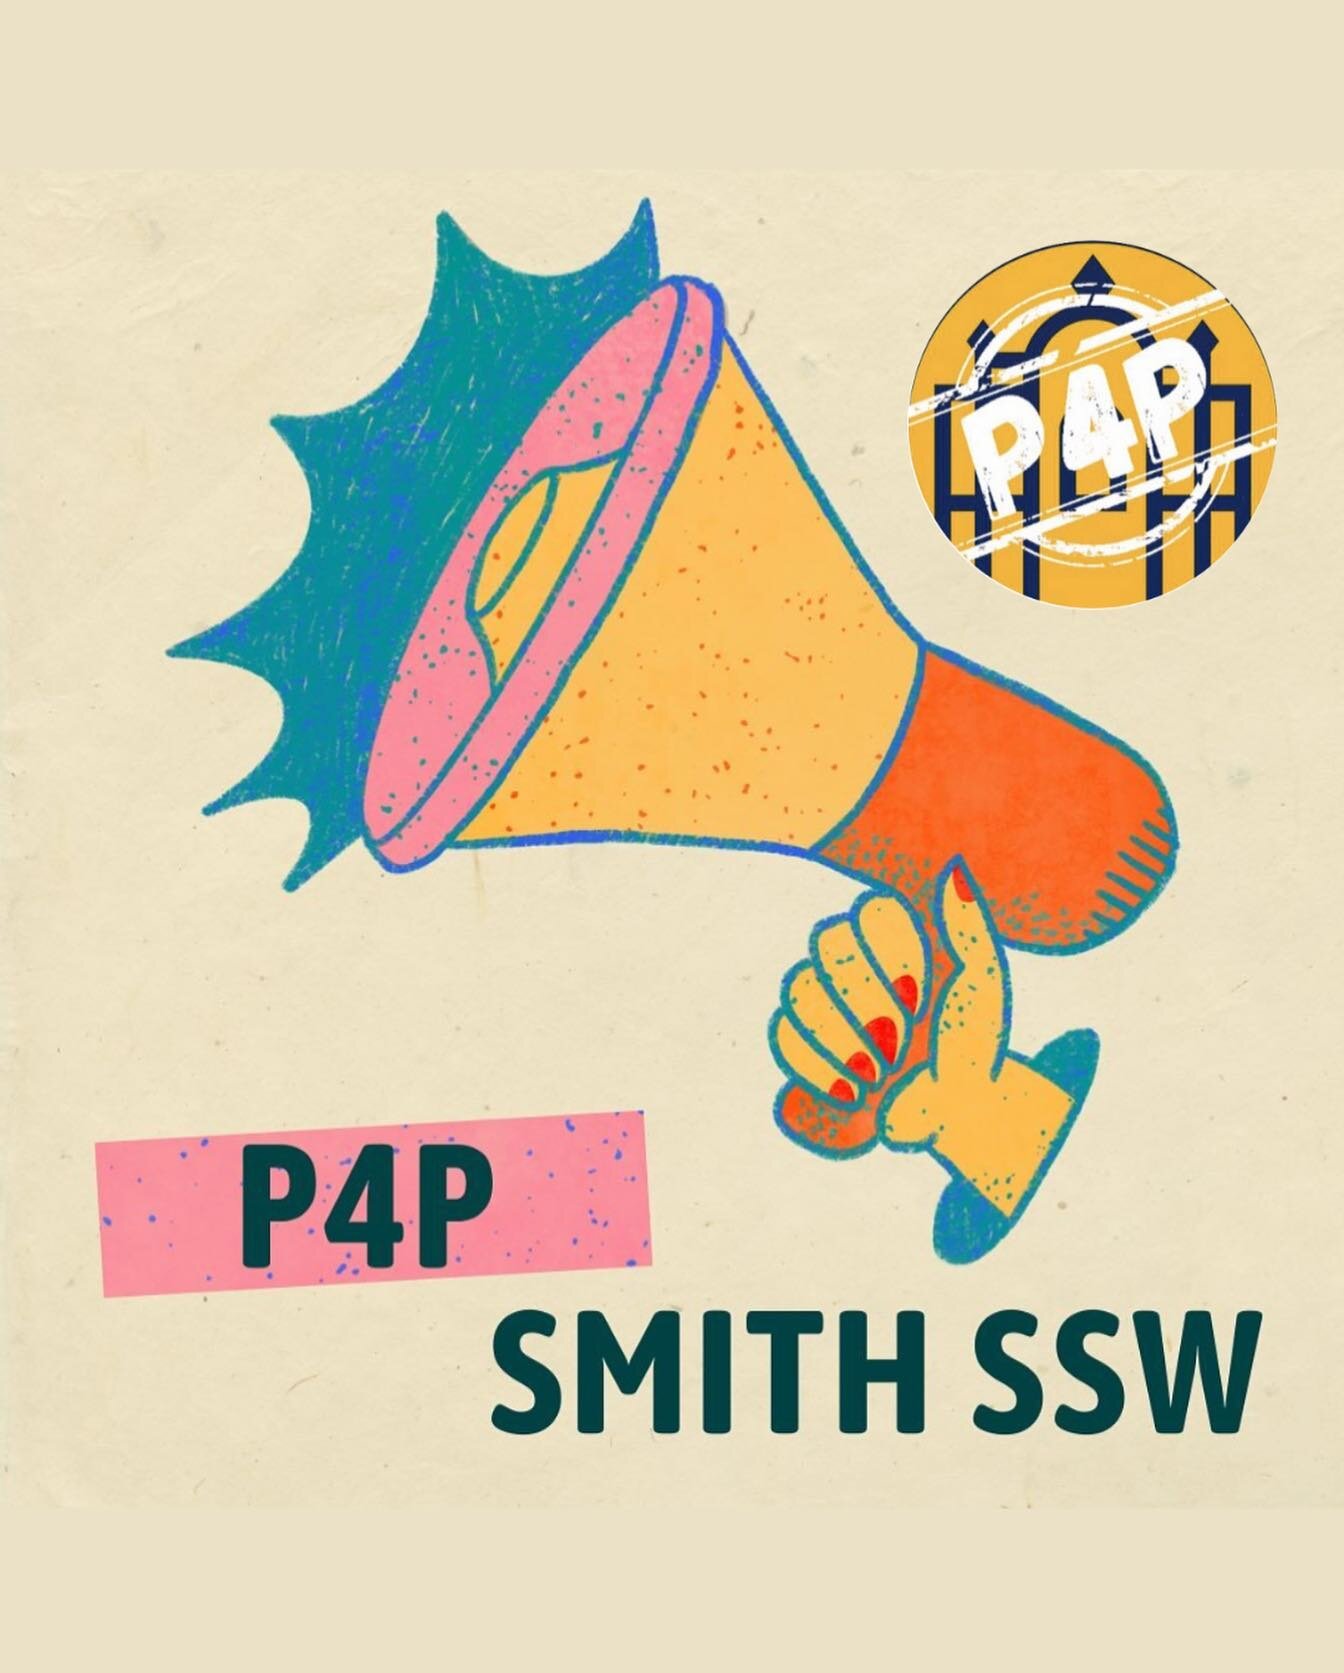 Follow Payment for Placements at Smith SSW @smithssw_p4p! Smith College P4P is a collective movement of Smith SSW students organizing and advocating for universal, fair pay for practicum placements &amp; the 45th chapter of P4P.

📷 #Repost P4P at Sm